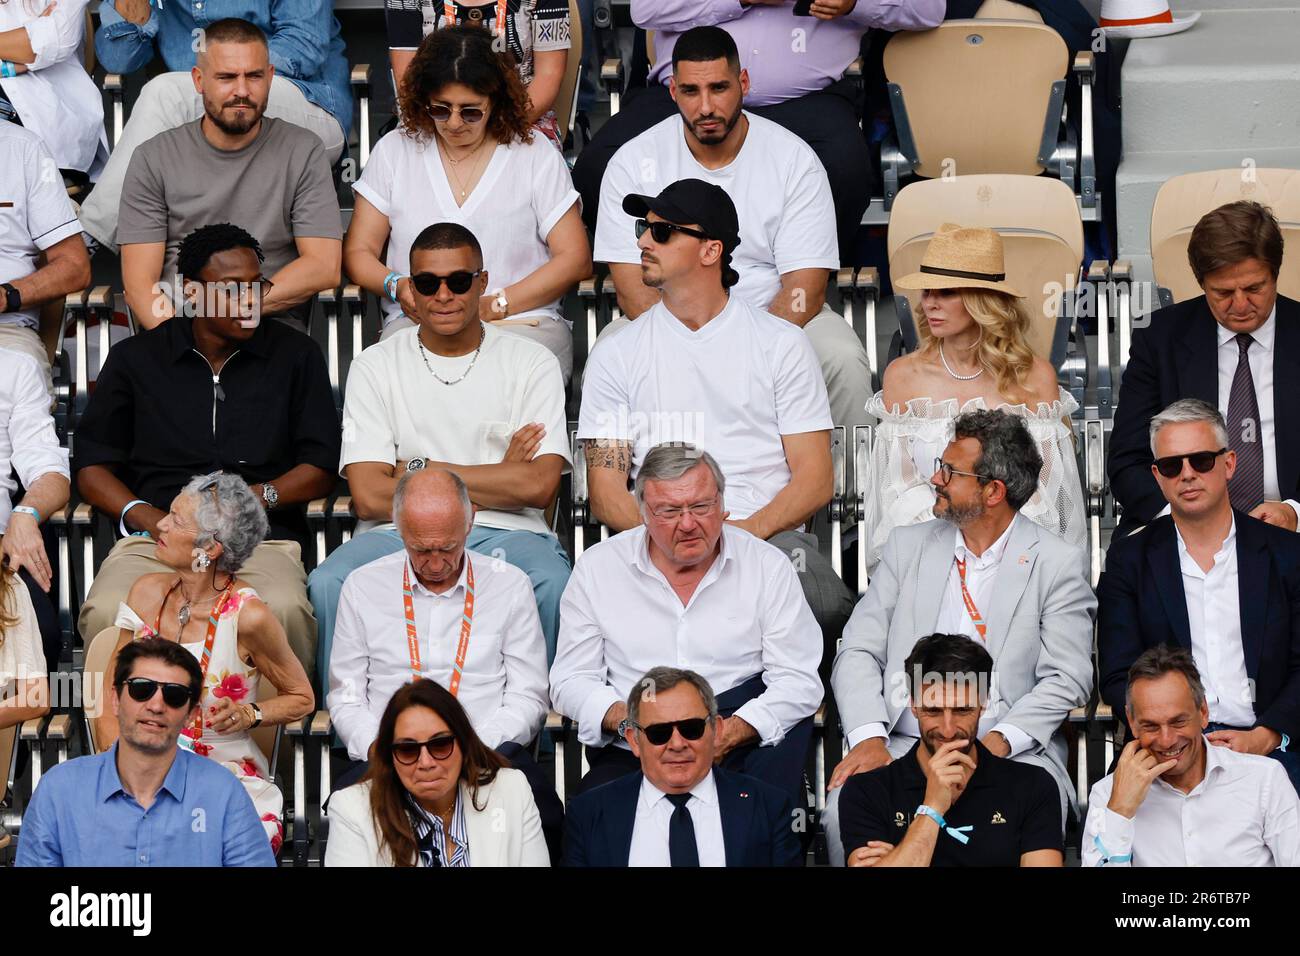 Football players Kylian Mbappe, center left, and Zlatan Ibrahimovic, center right, both wearing sunglasses, watch the final match of the French Open tennis tournament between Serbias Novak Djokovic and Norways Casper Ruud